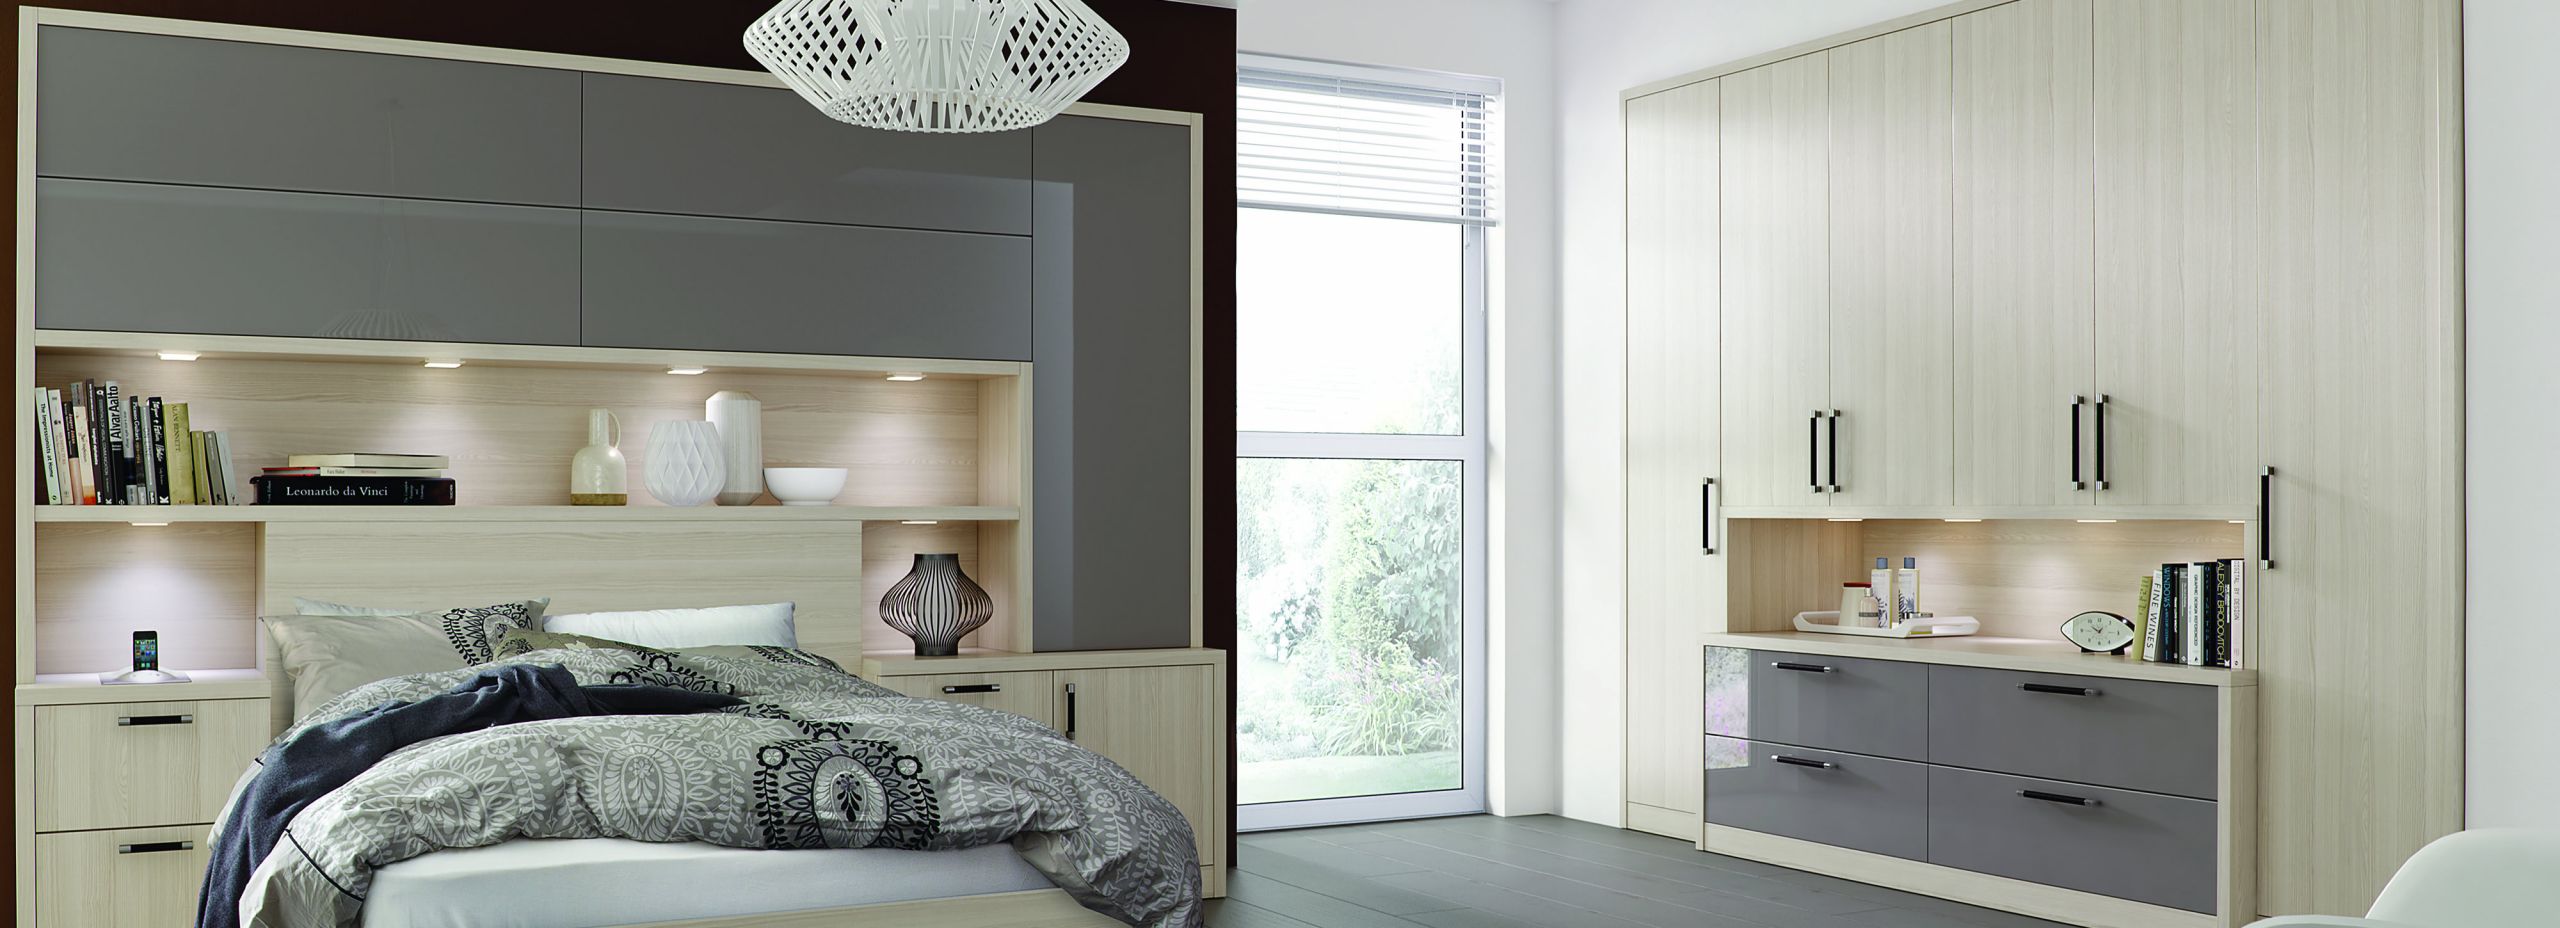 Furniture For A Small Bedroom
 Fitted Bedroom Wardrobes design & install Surrey